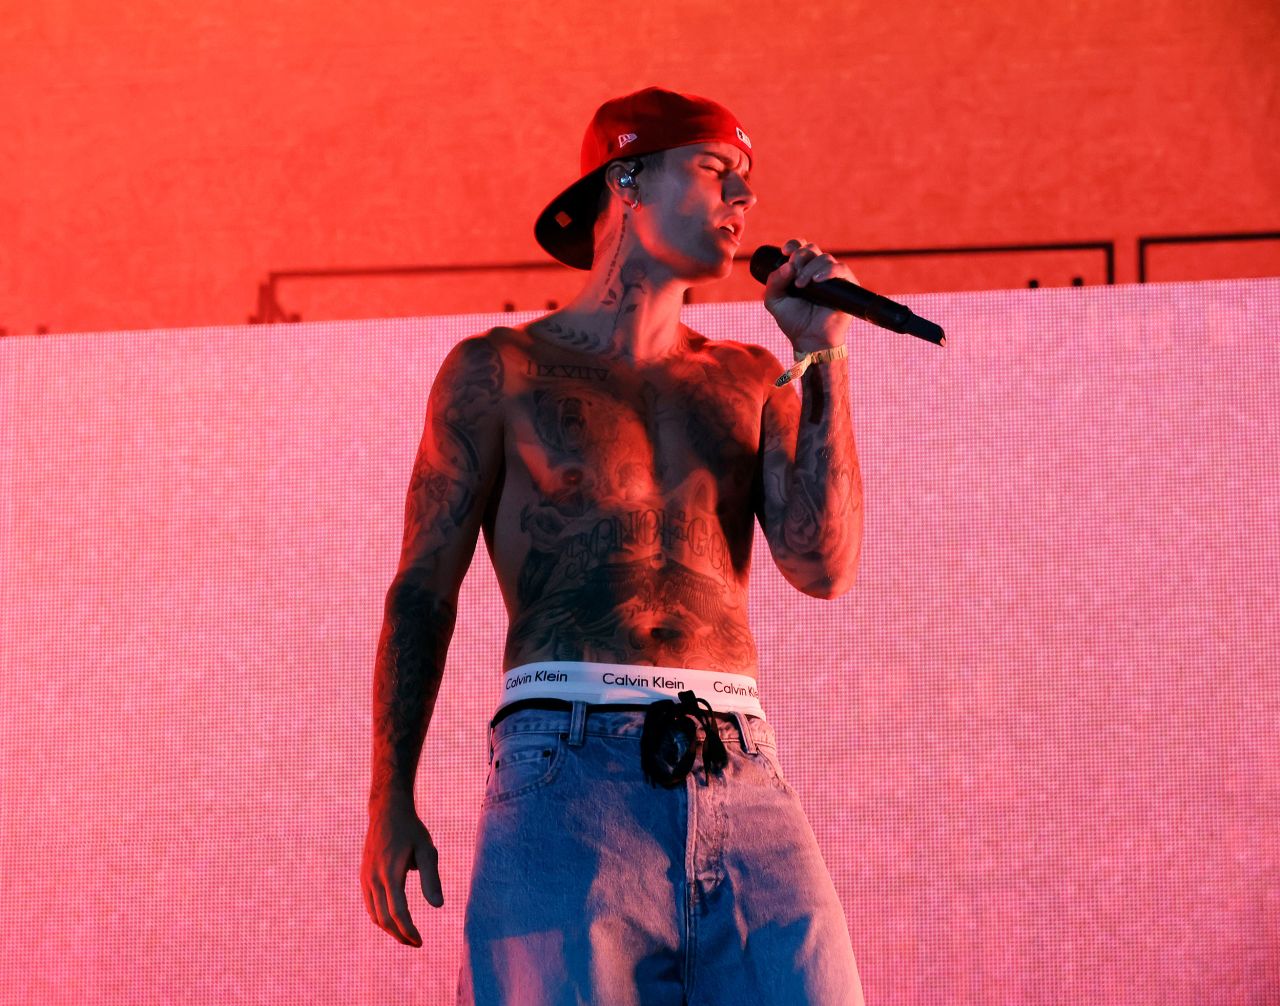 Bieber performs at the Coachella music festival in Indio, California, in April 2022. A couple of months later, he announced that he is taking a break from performing because <a href="https://www.cnn.com/2022/06/10/entertainment/justin-bieber-paralysis-ramsay-hunt/index.html" target="_blank">he is suffering from paralysis on one side of his face.</a> He said it is related to his Ramsay Hunt syndrome and that he doesn't know how long it will take him to recover.